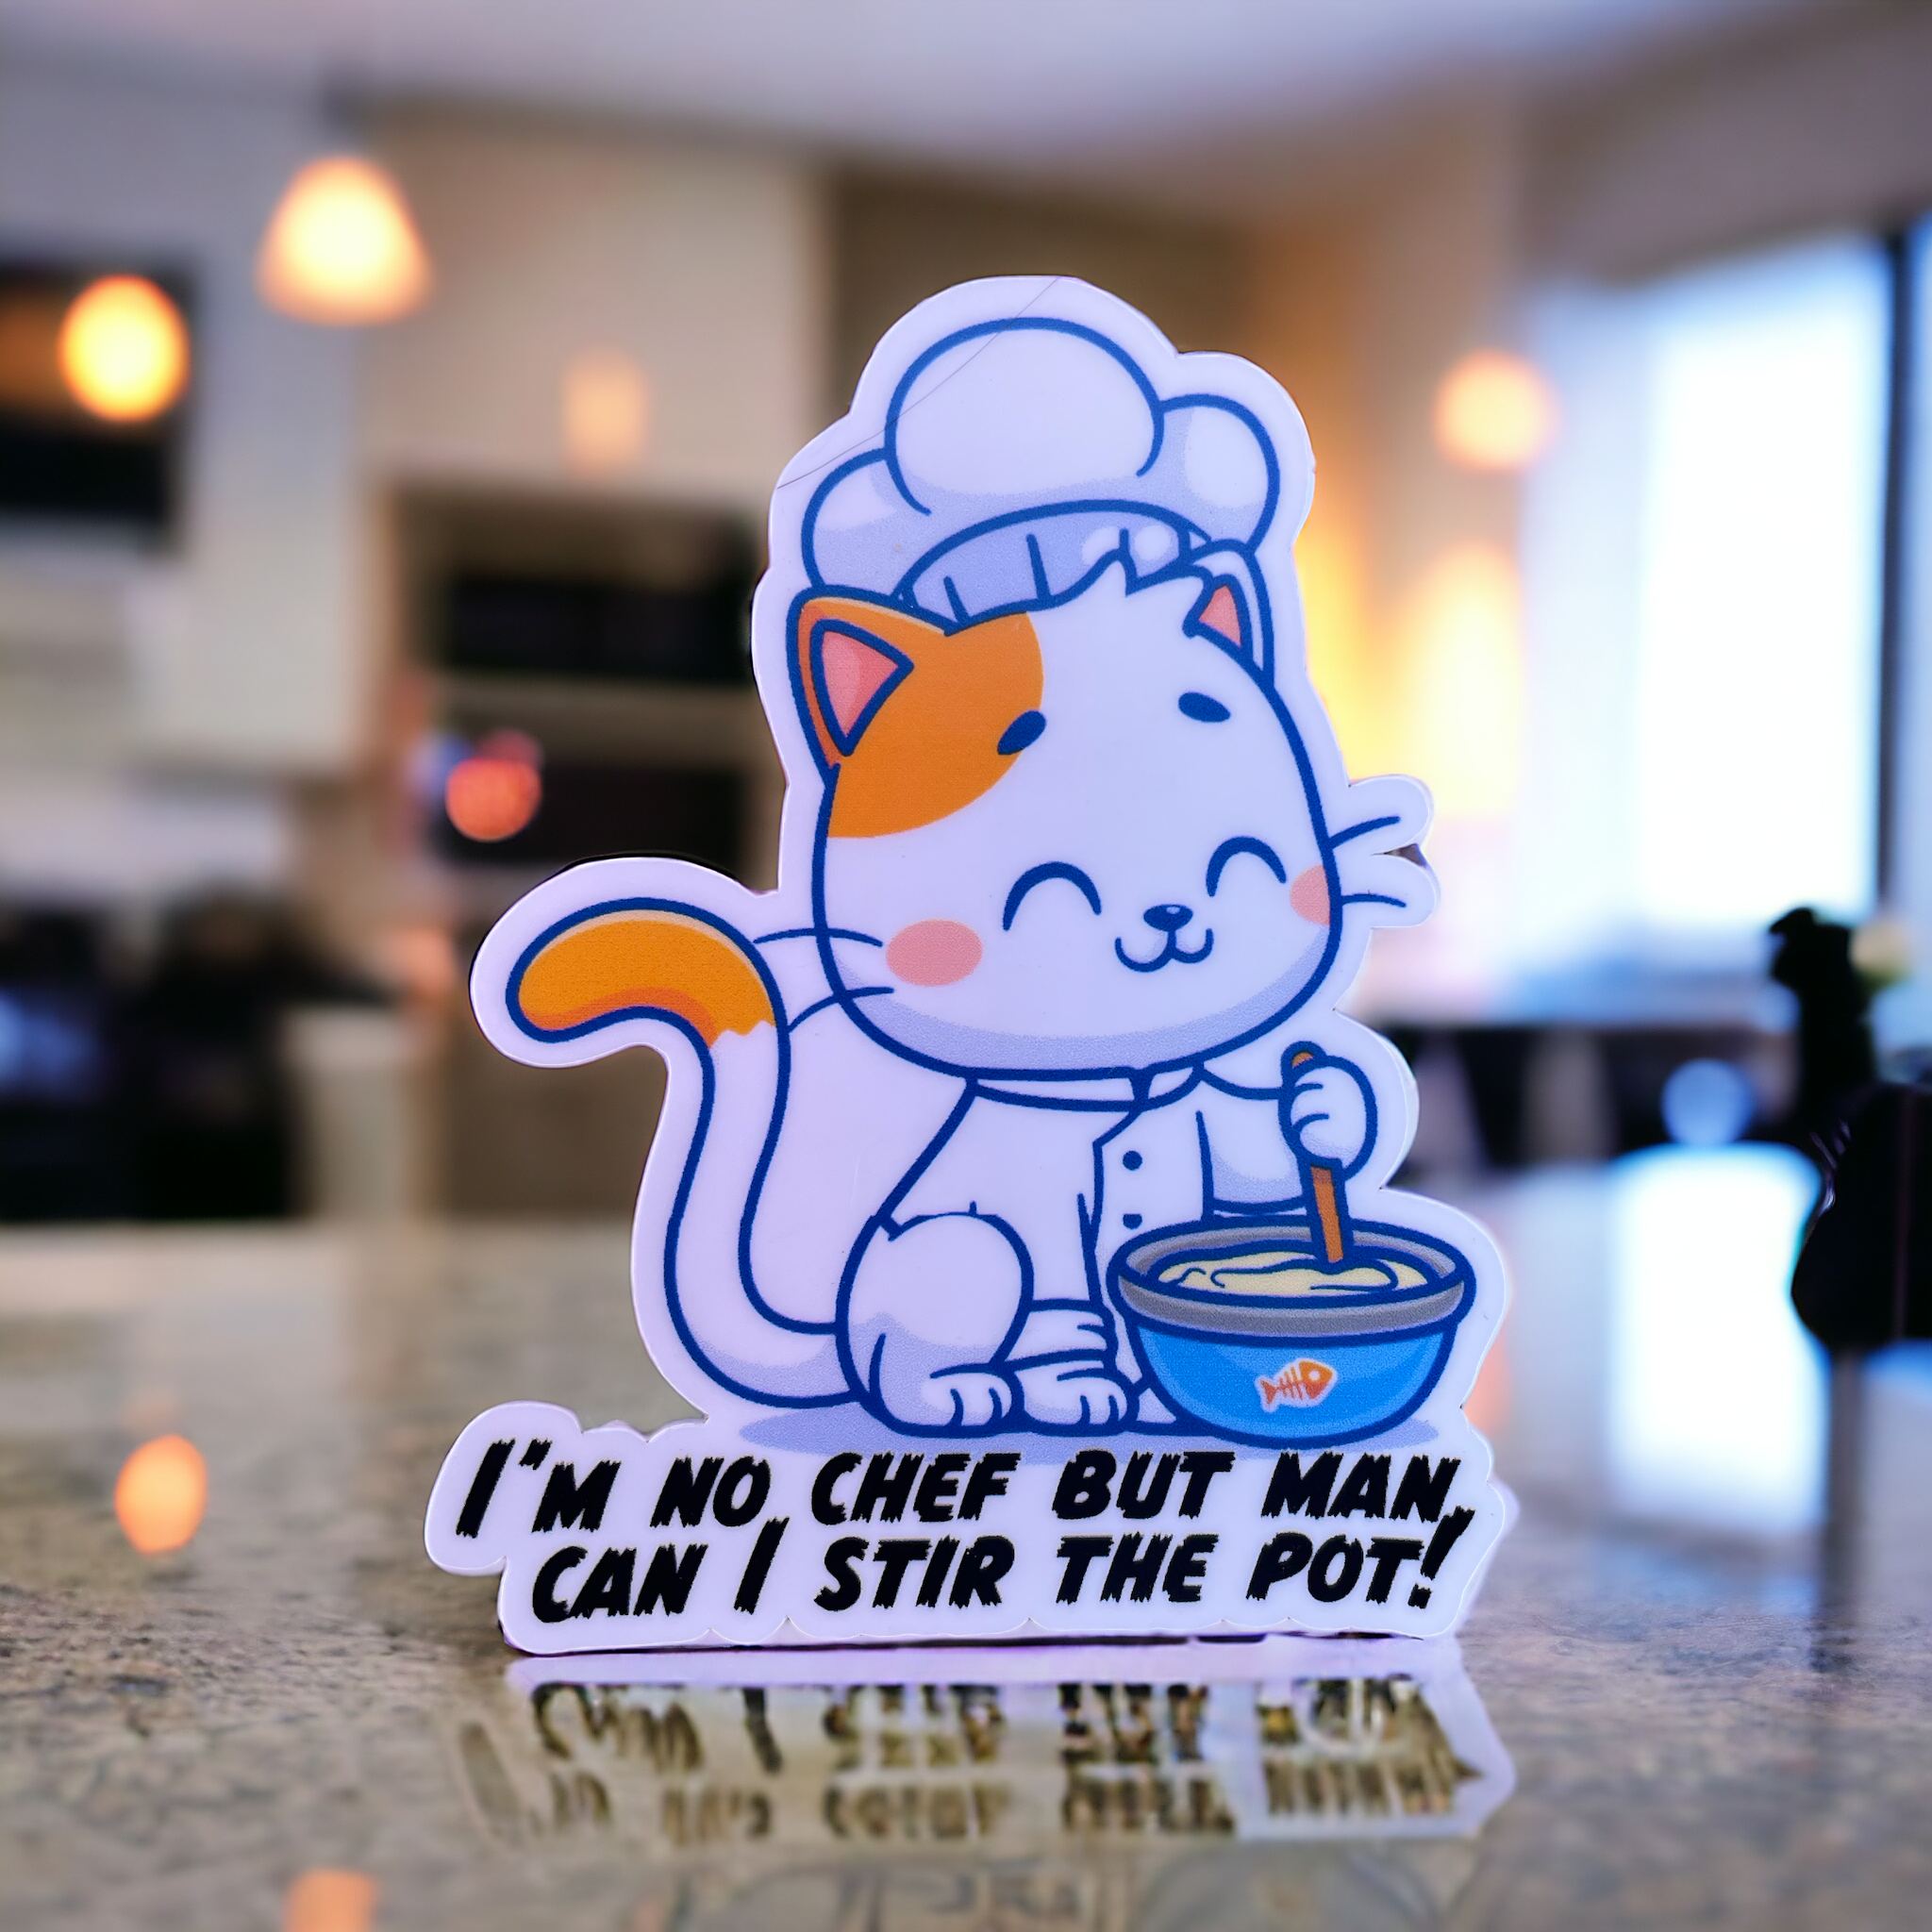 I'm No Chef But Man, Can I Stir The Pot! - Water Resistant Sticker